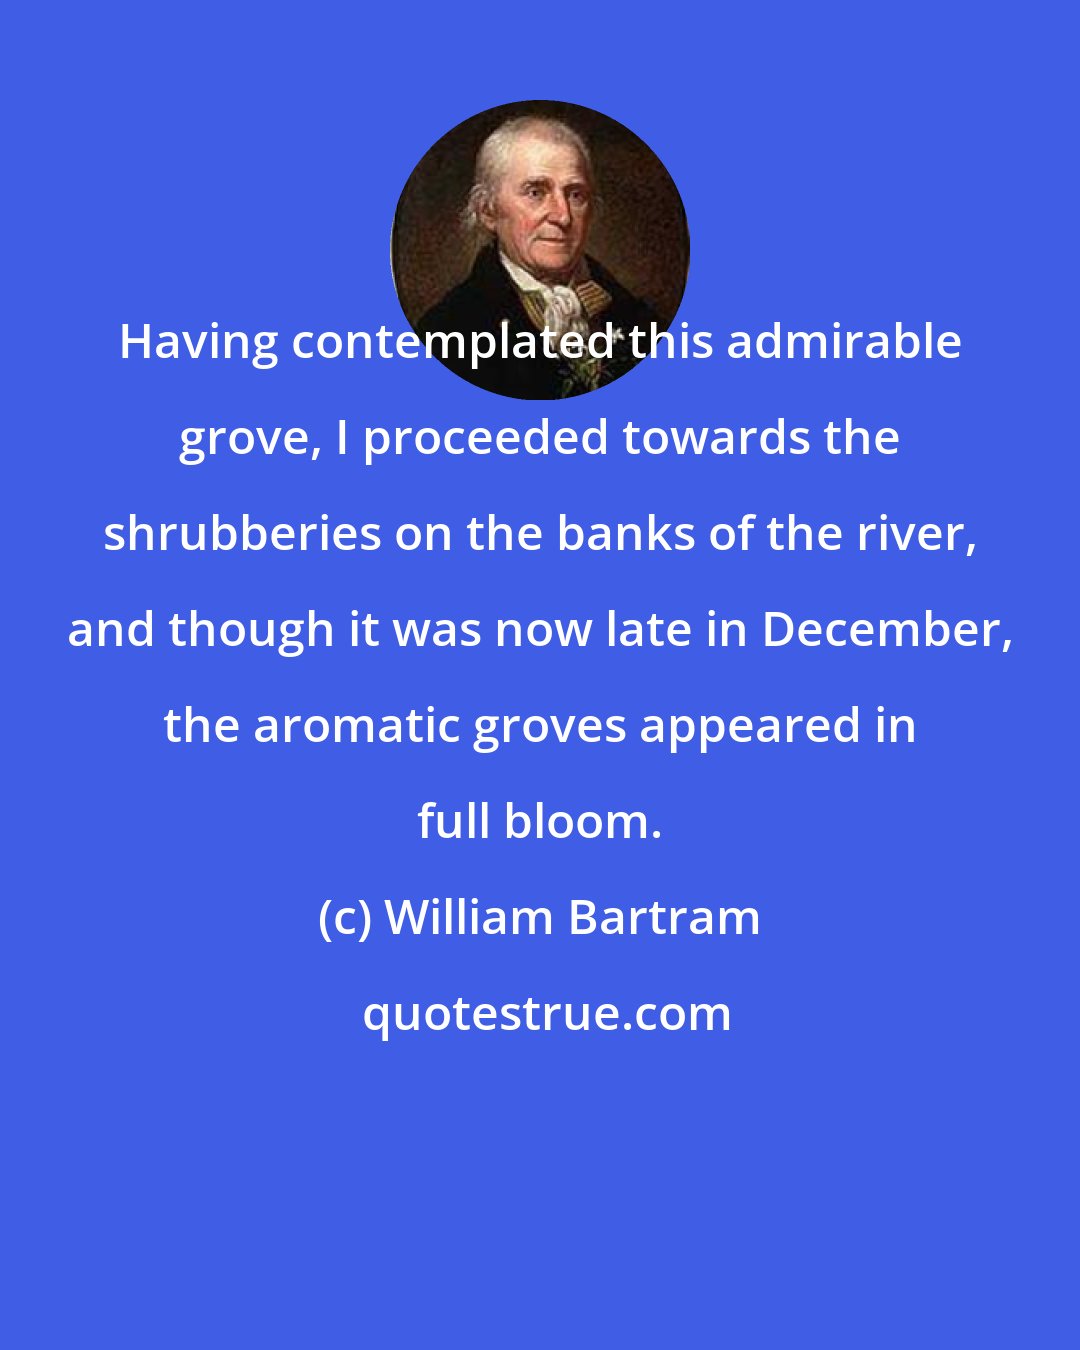 William Bartram: Having contemplated this admirable grove, I proceeded towards the shrubberies on the banks of the river, and though it was now late in December, the aromatic groves appeared in full bloom.